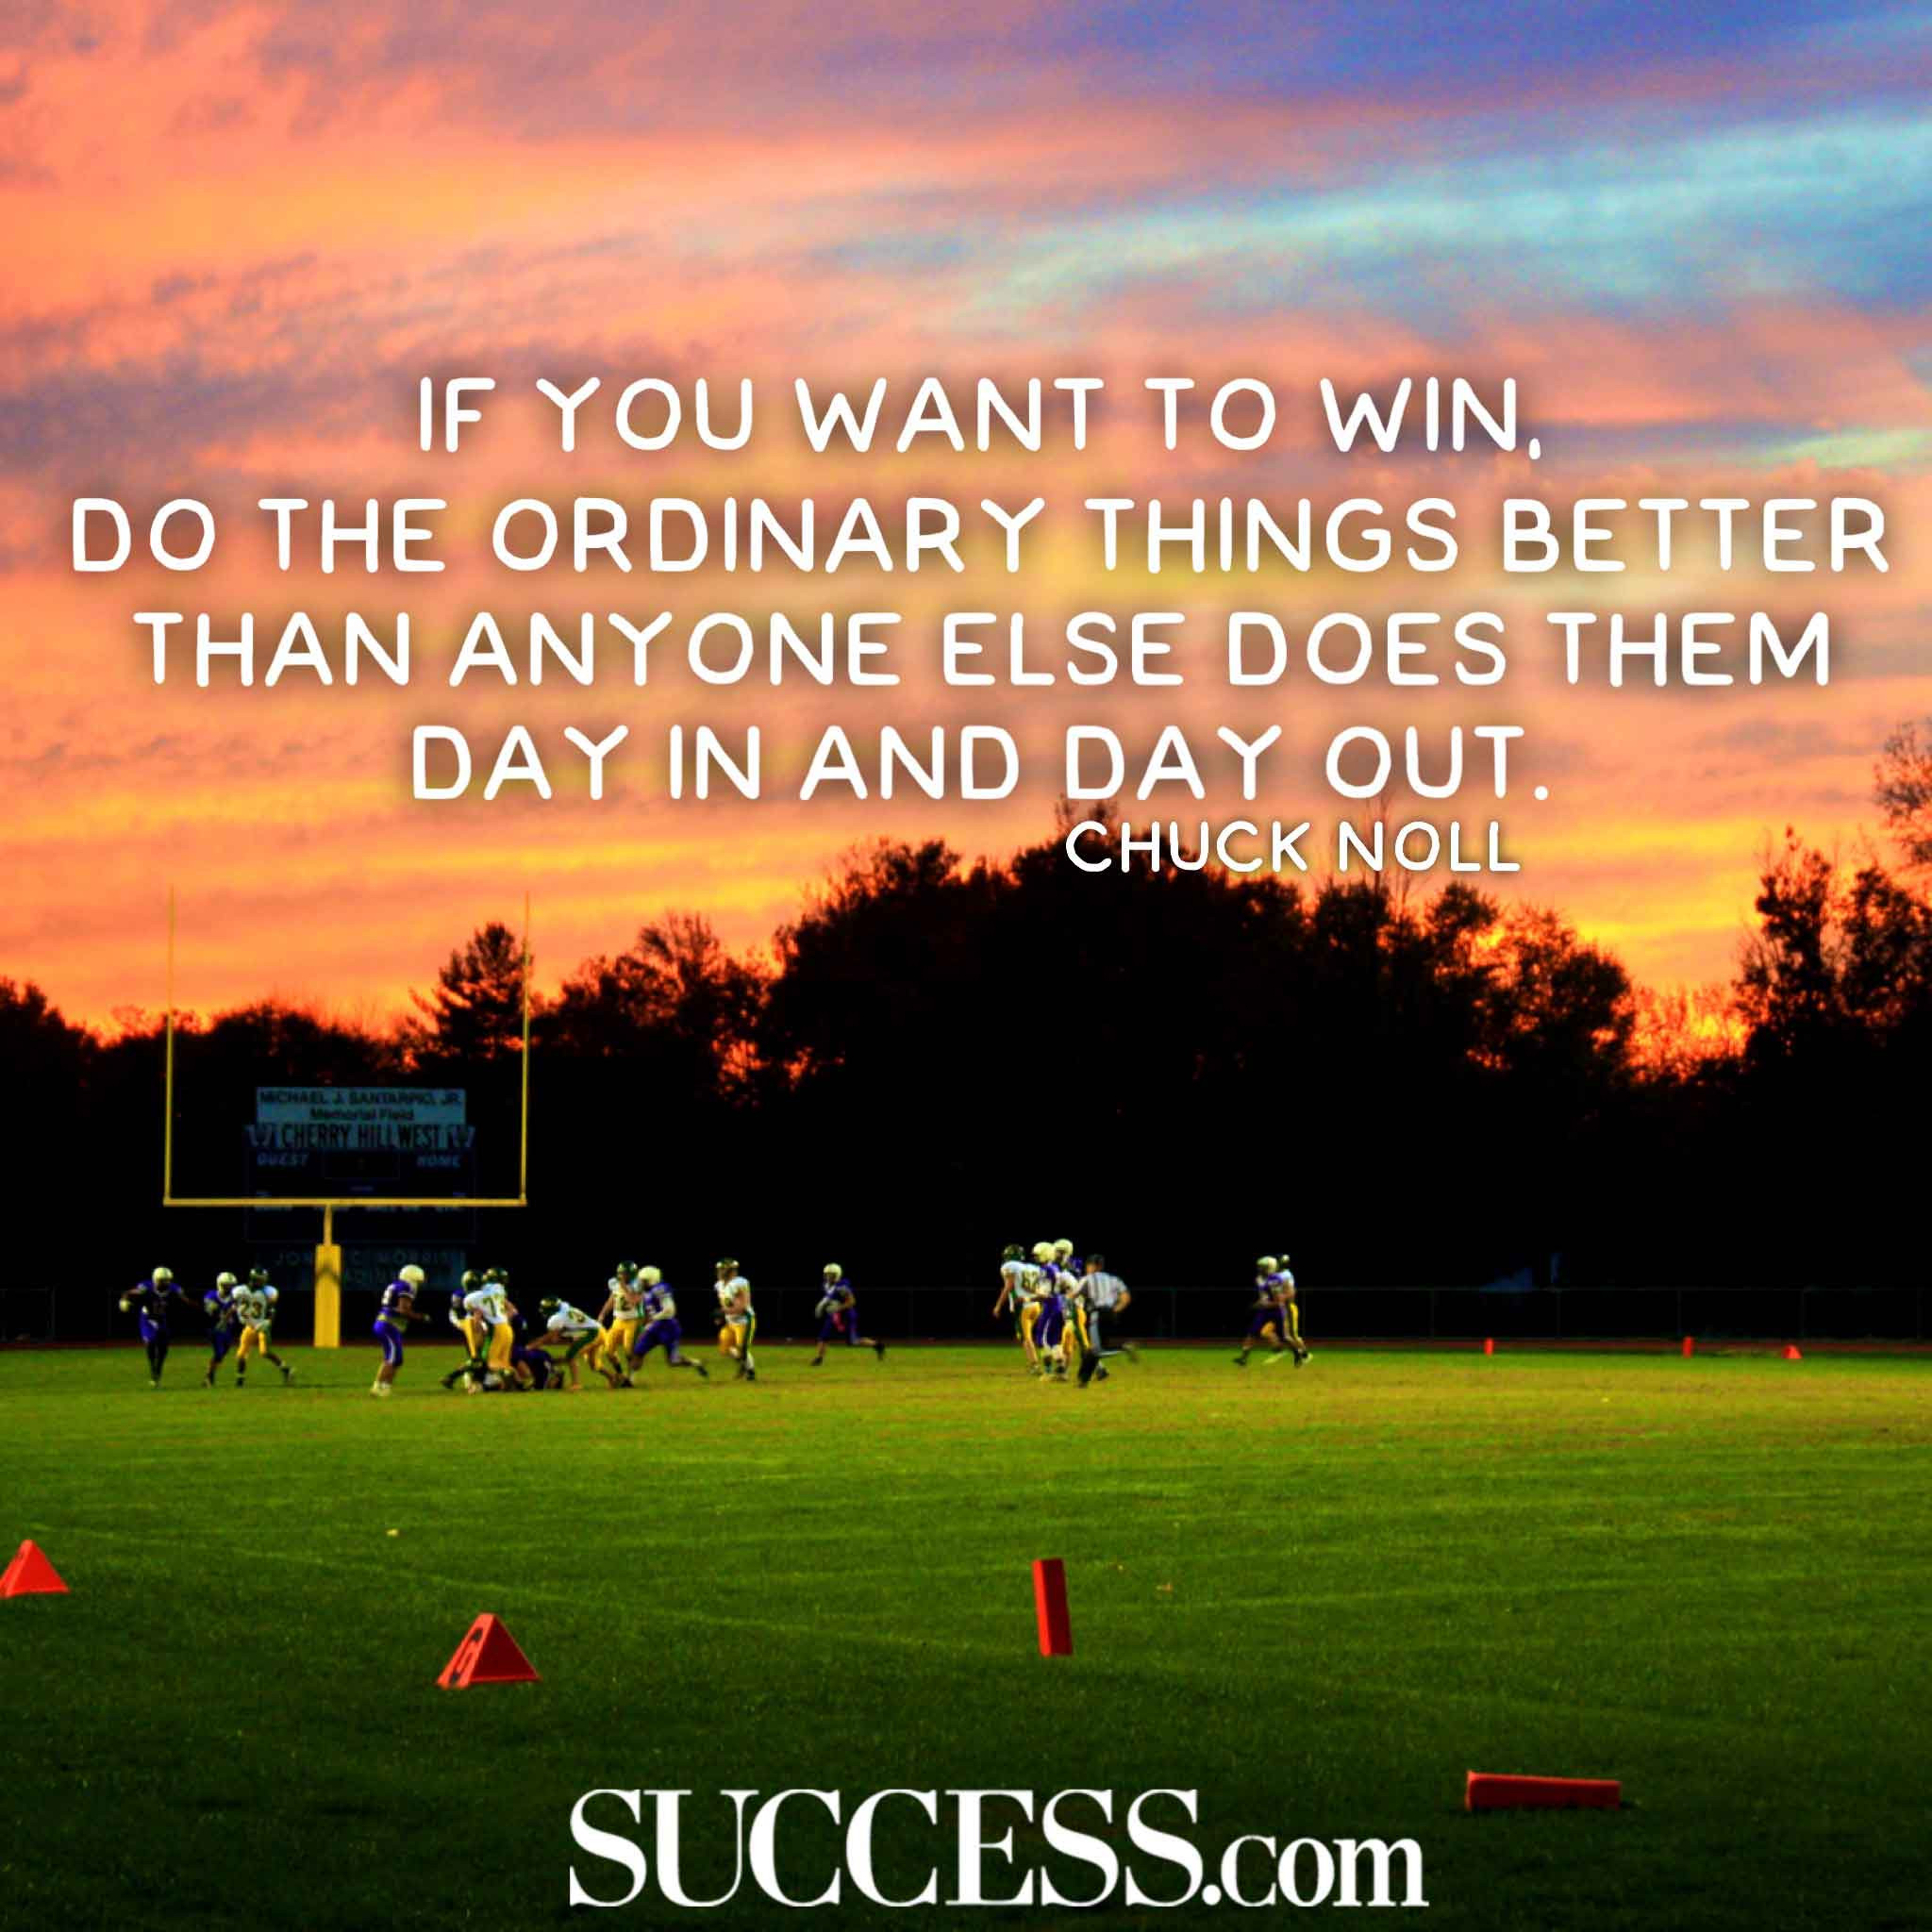 Motivational Football Quotes
 20 Motivational Quotes by the Most Inspiring NFL Coaches